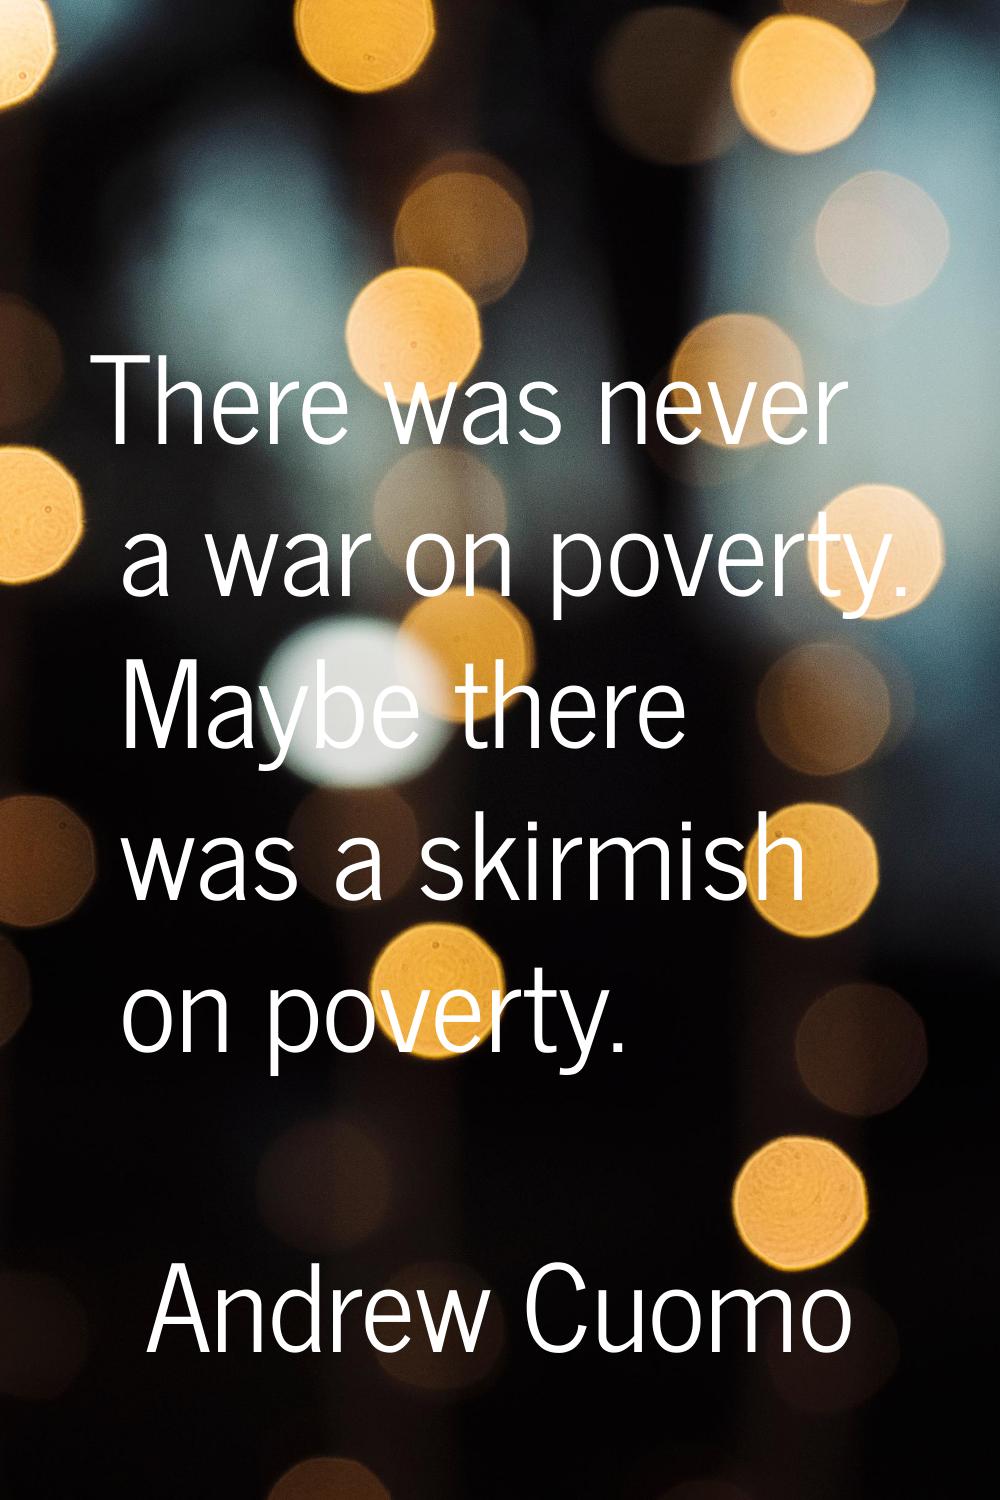 There was never a war on poverty. Maybe there was a skirmish on poverty.